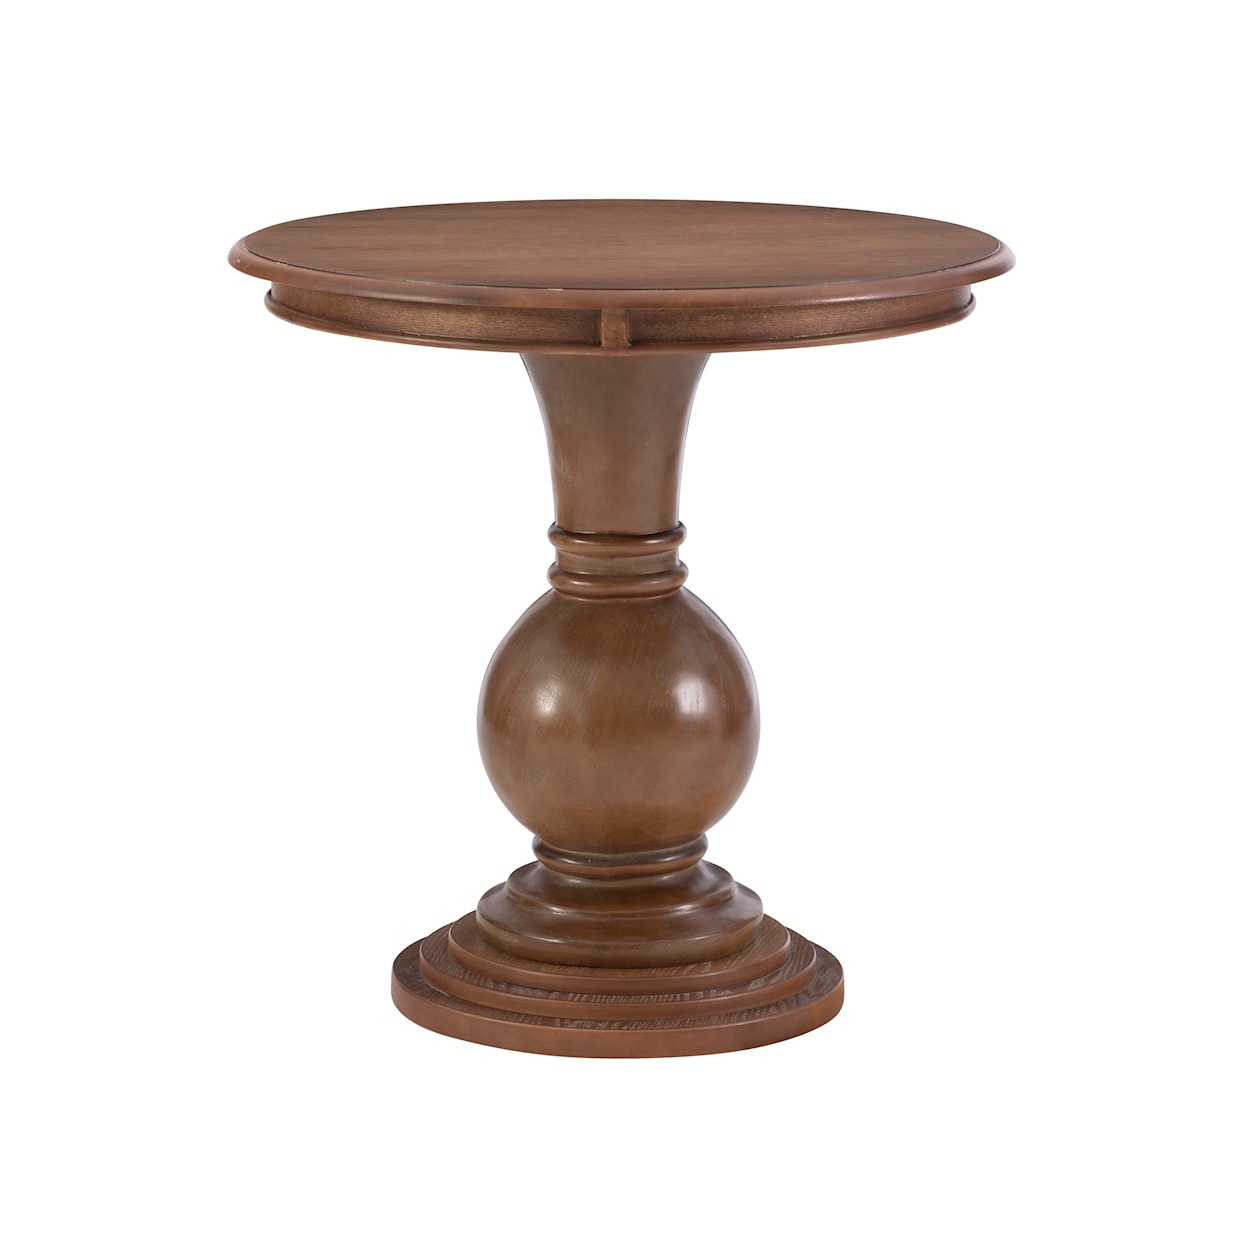 Powell ADELINE Adeline Round Accent Table Natural